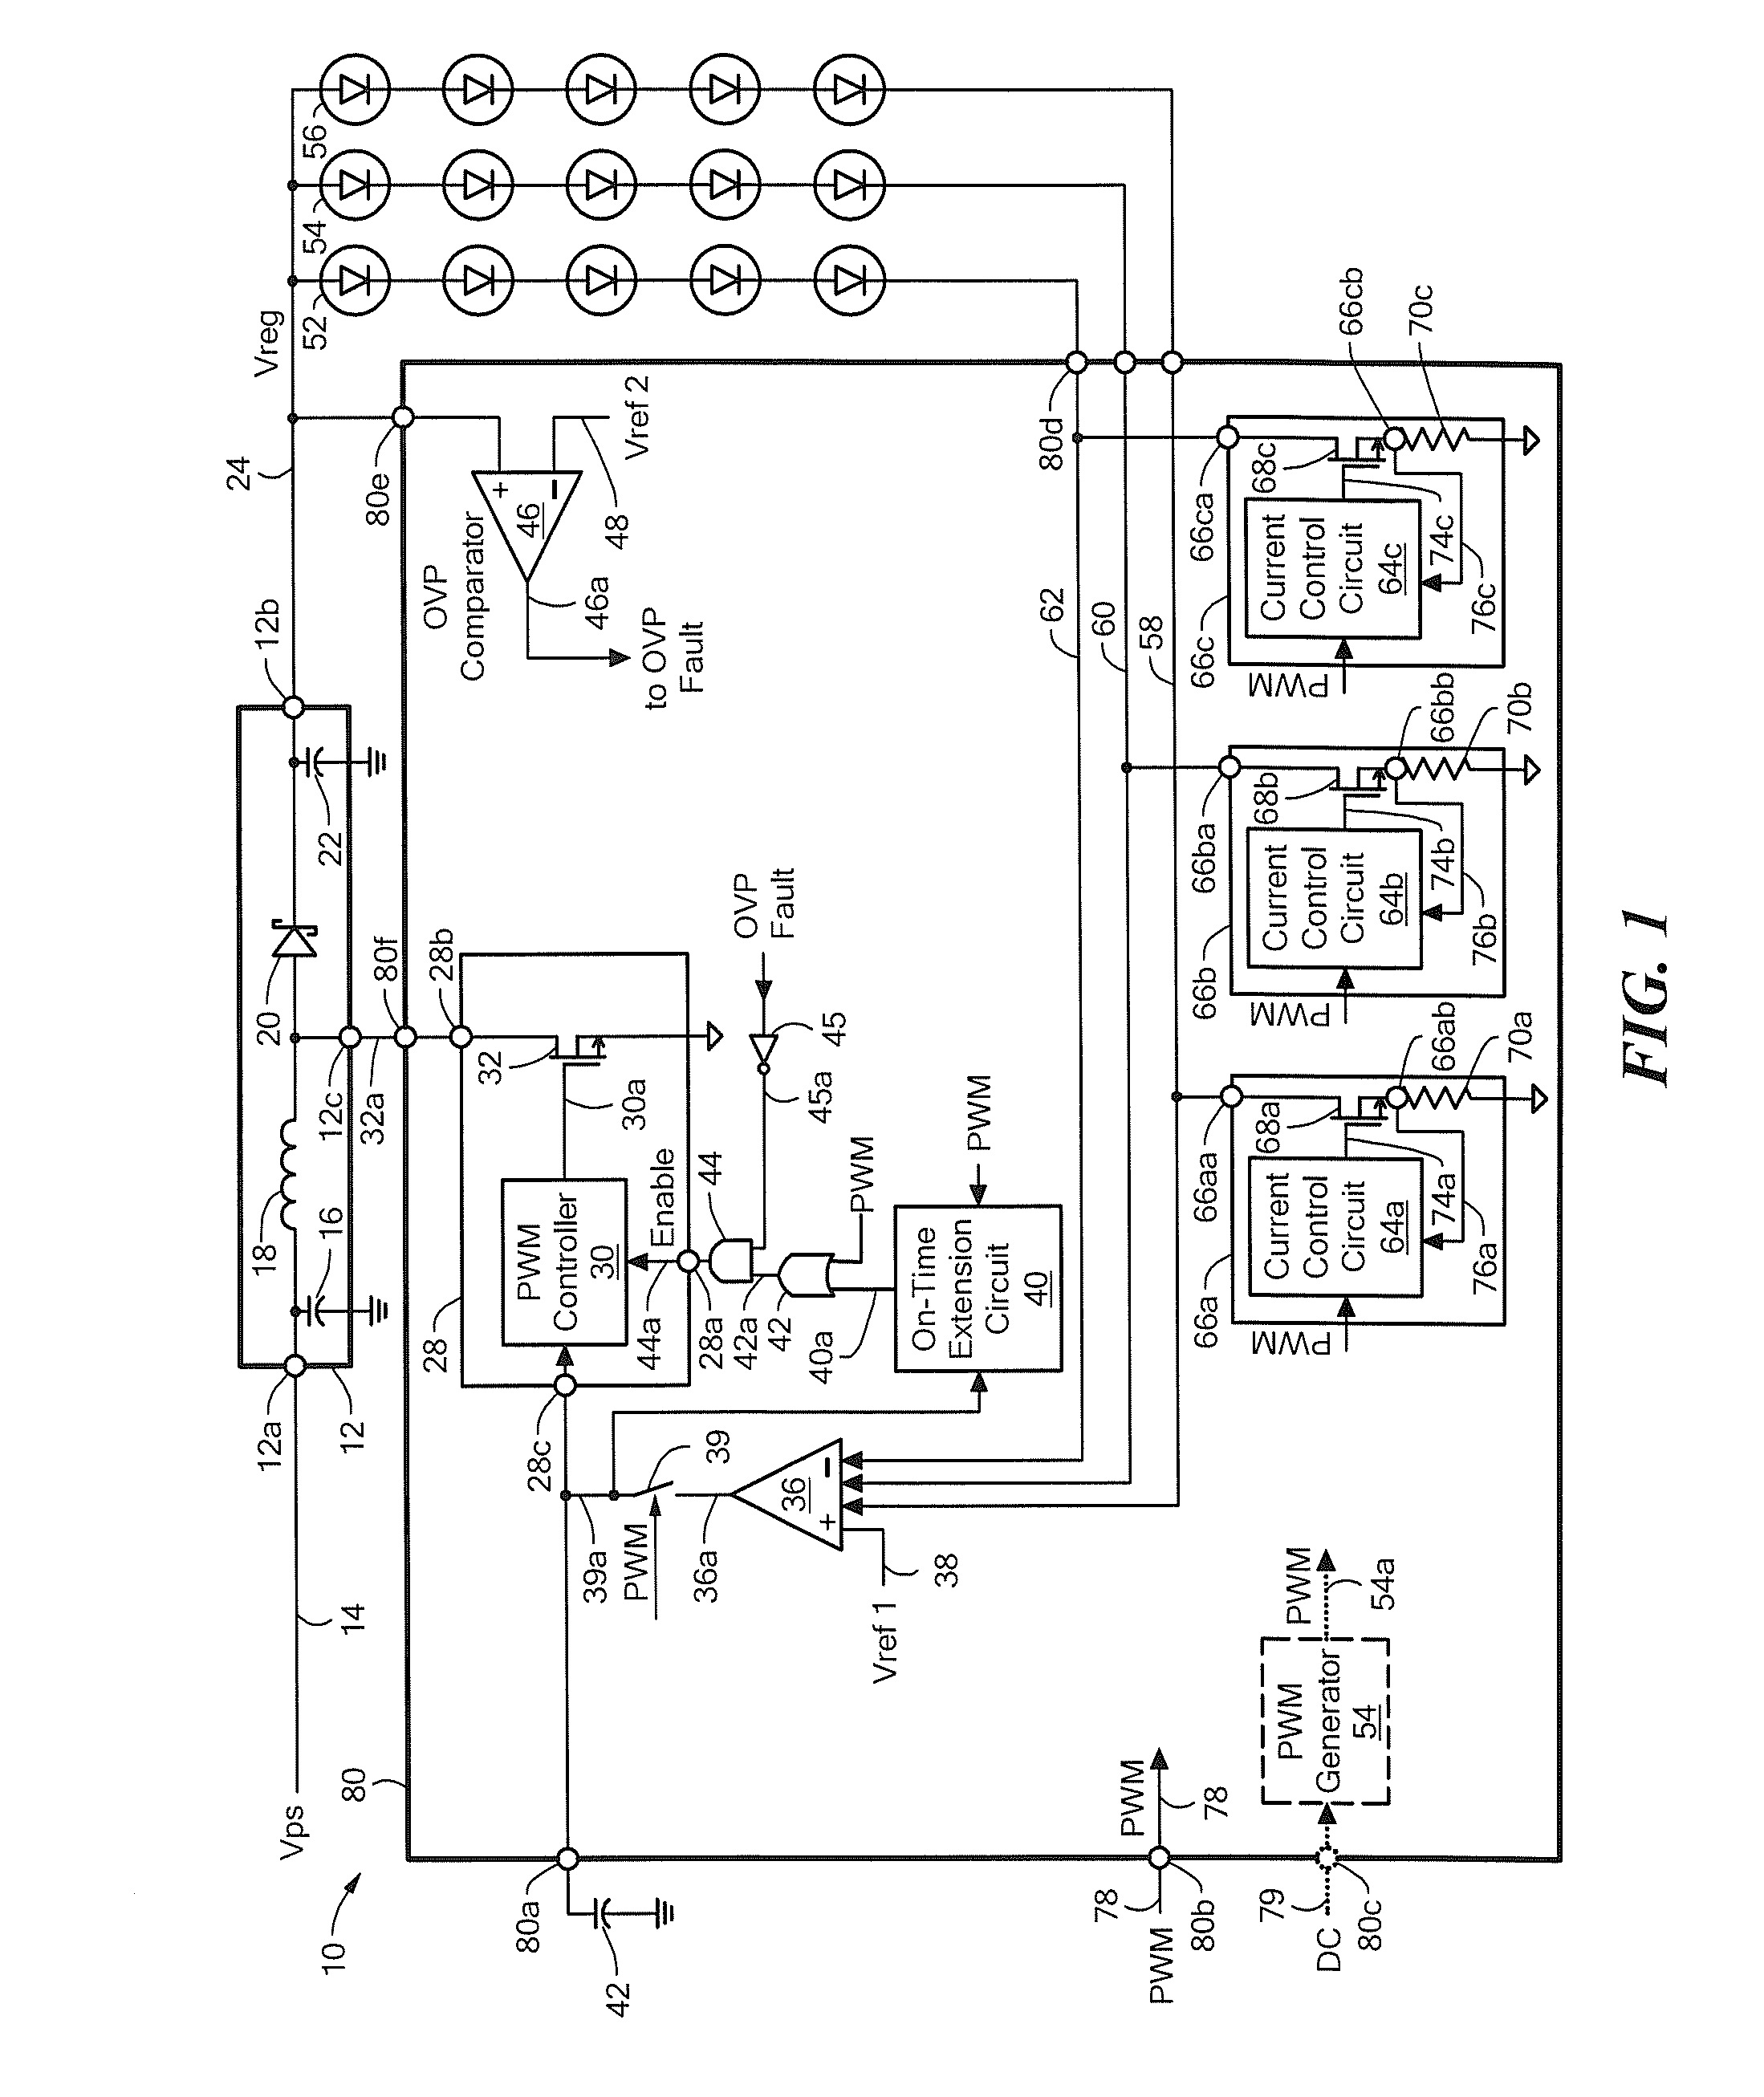 Electronic Circuits and Techniques for Improving a Short Duty Cycle Behavior of a DC-DC Converter Driving a Load